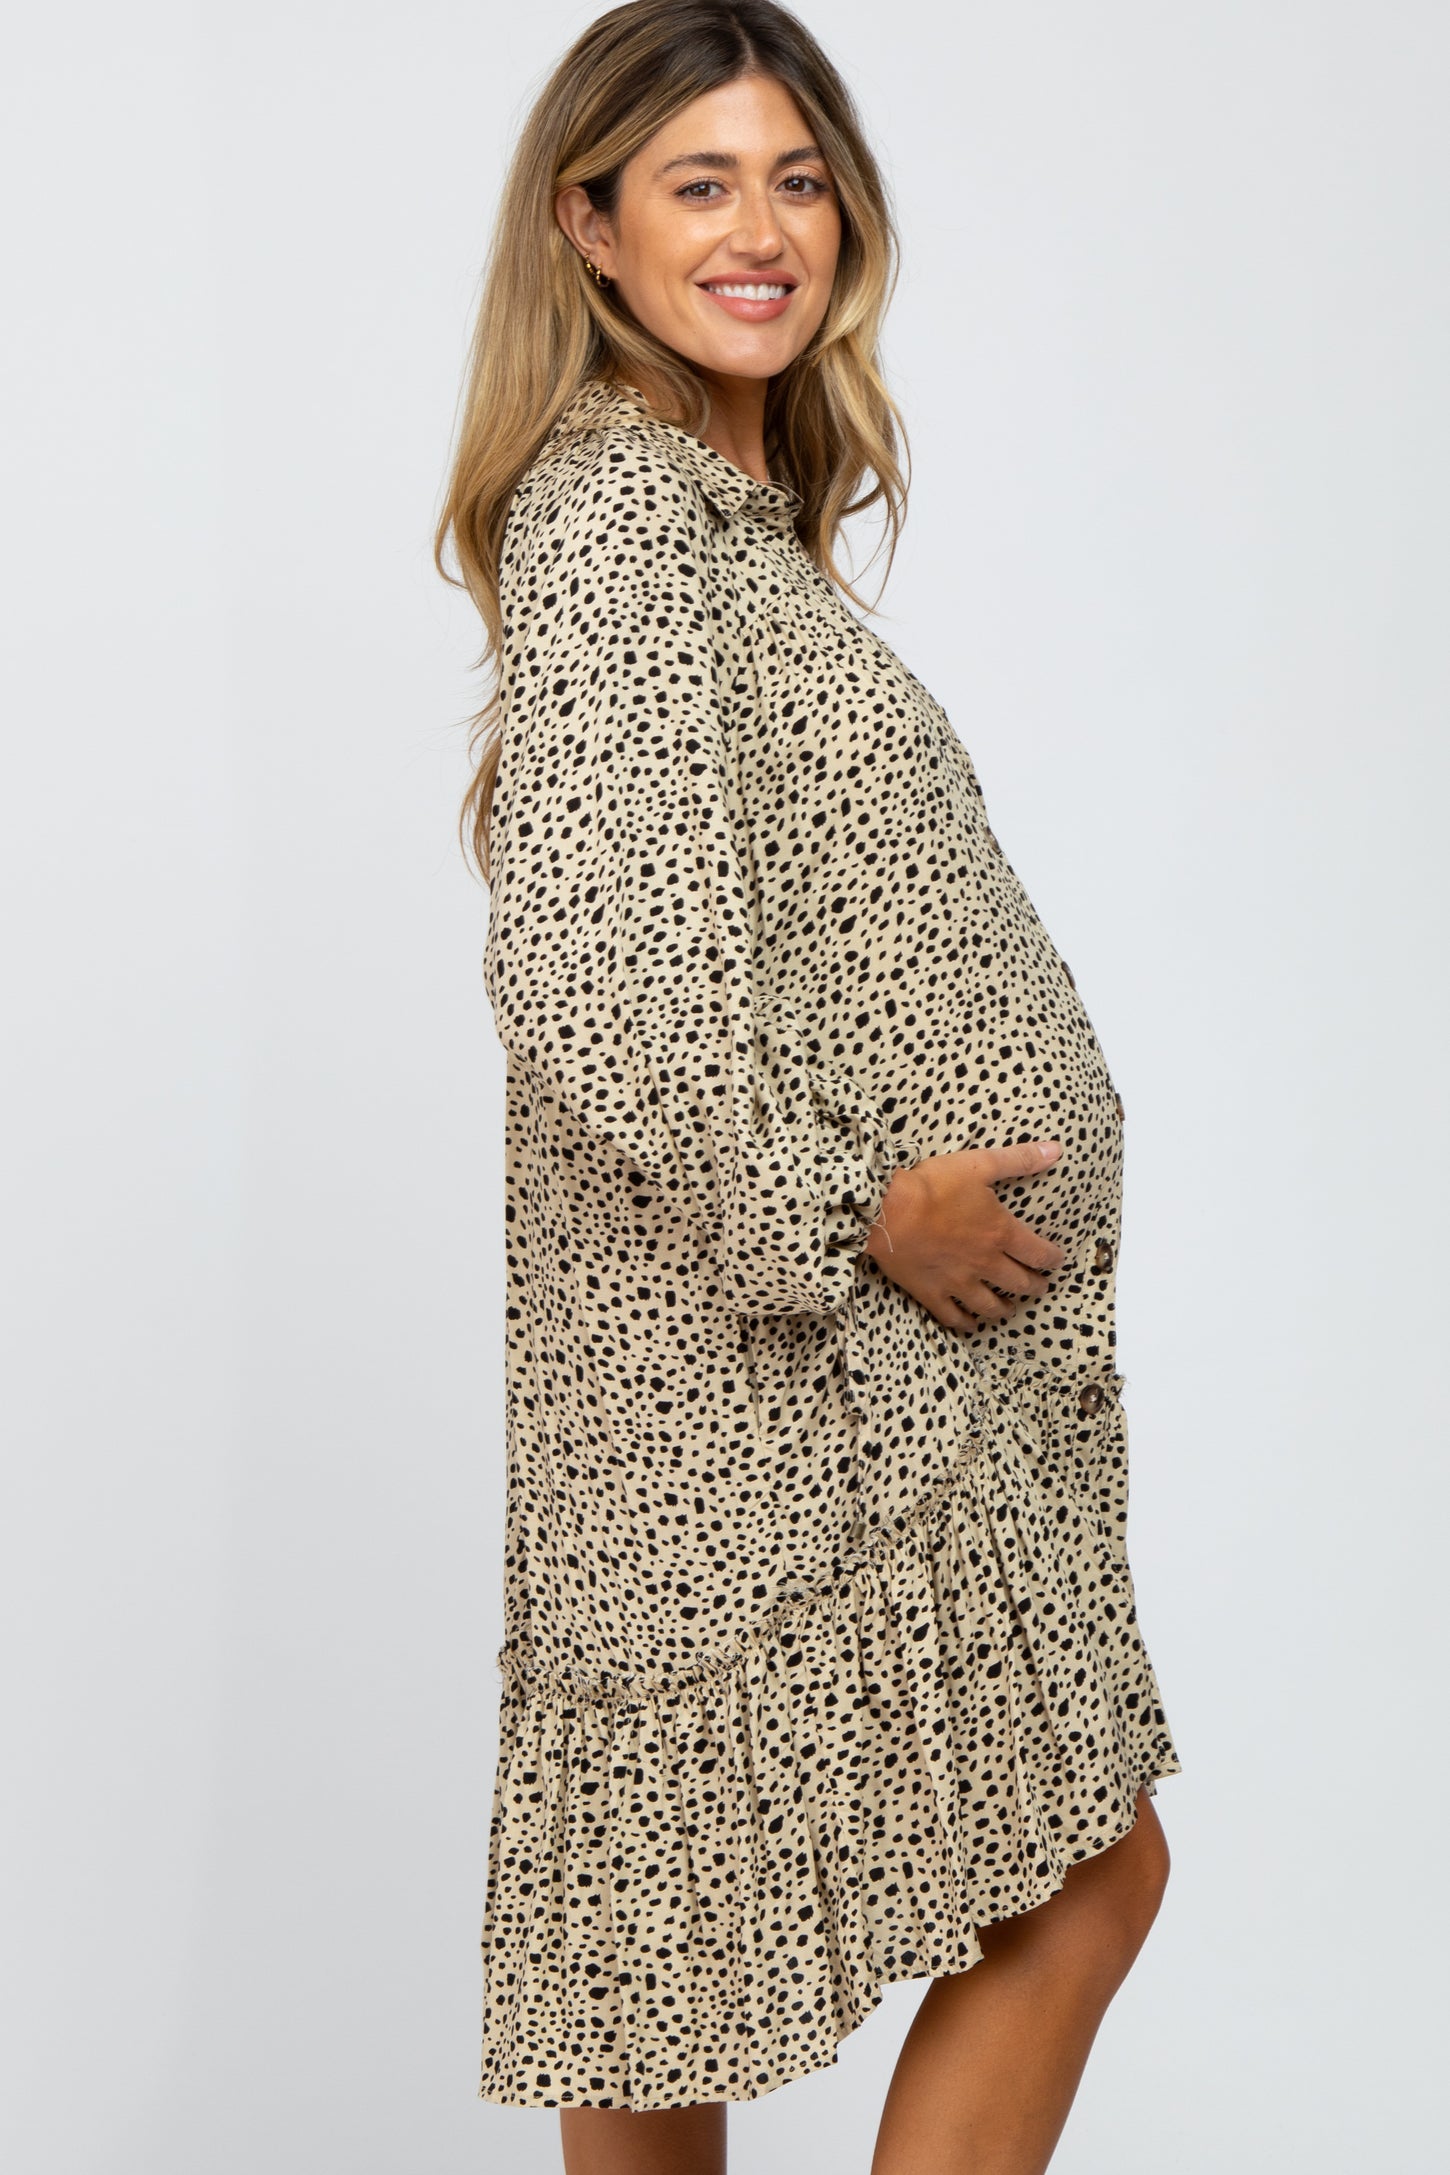 Ivory Animal Print Button Front Maternity Dress